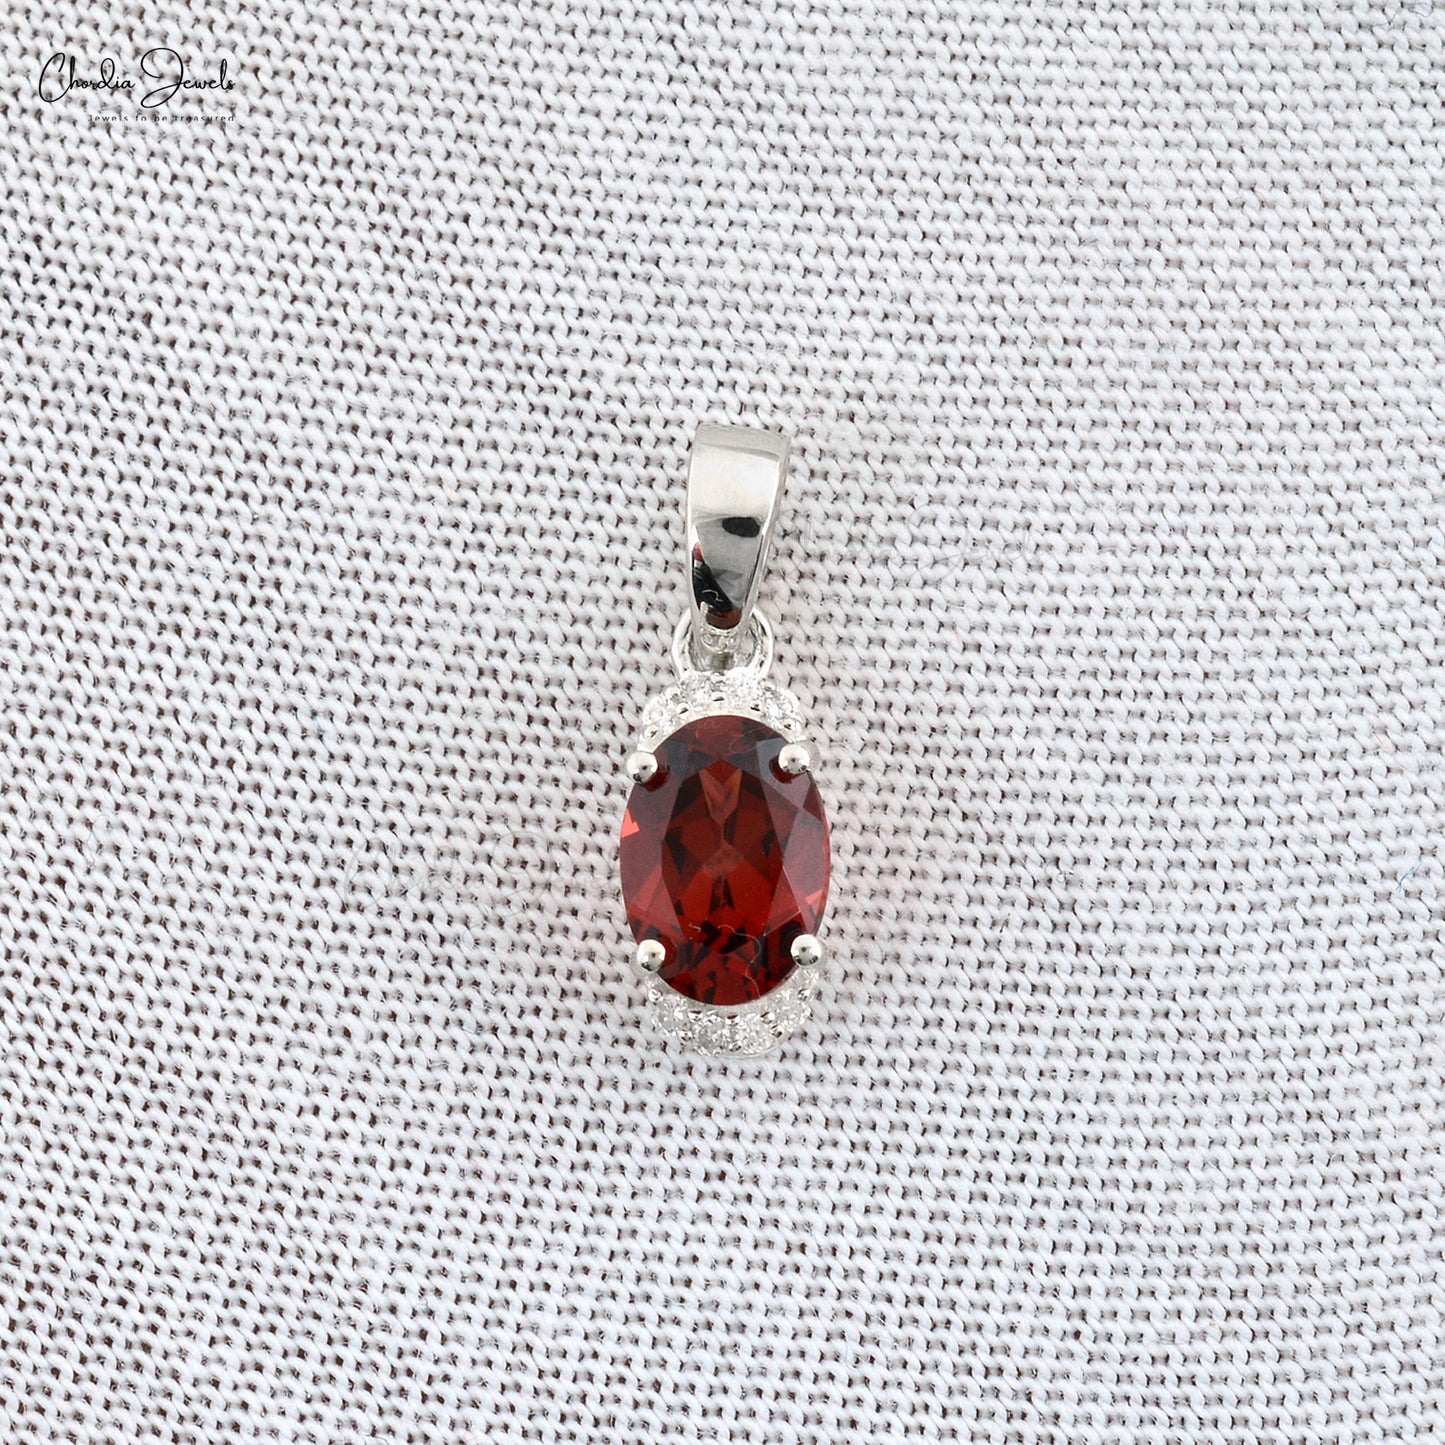 Sparkling Half Halo Diamond Pendant fits Necklace in 14k Real White Gold Genuine Garnet Gemstone Jewelry For Occasion Gift